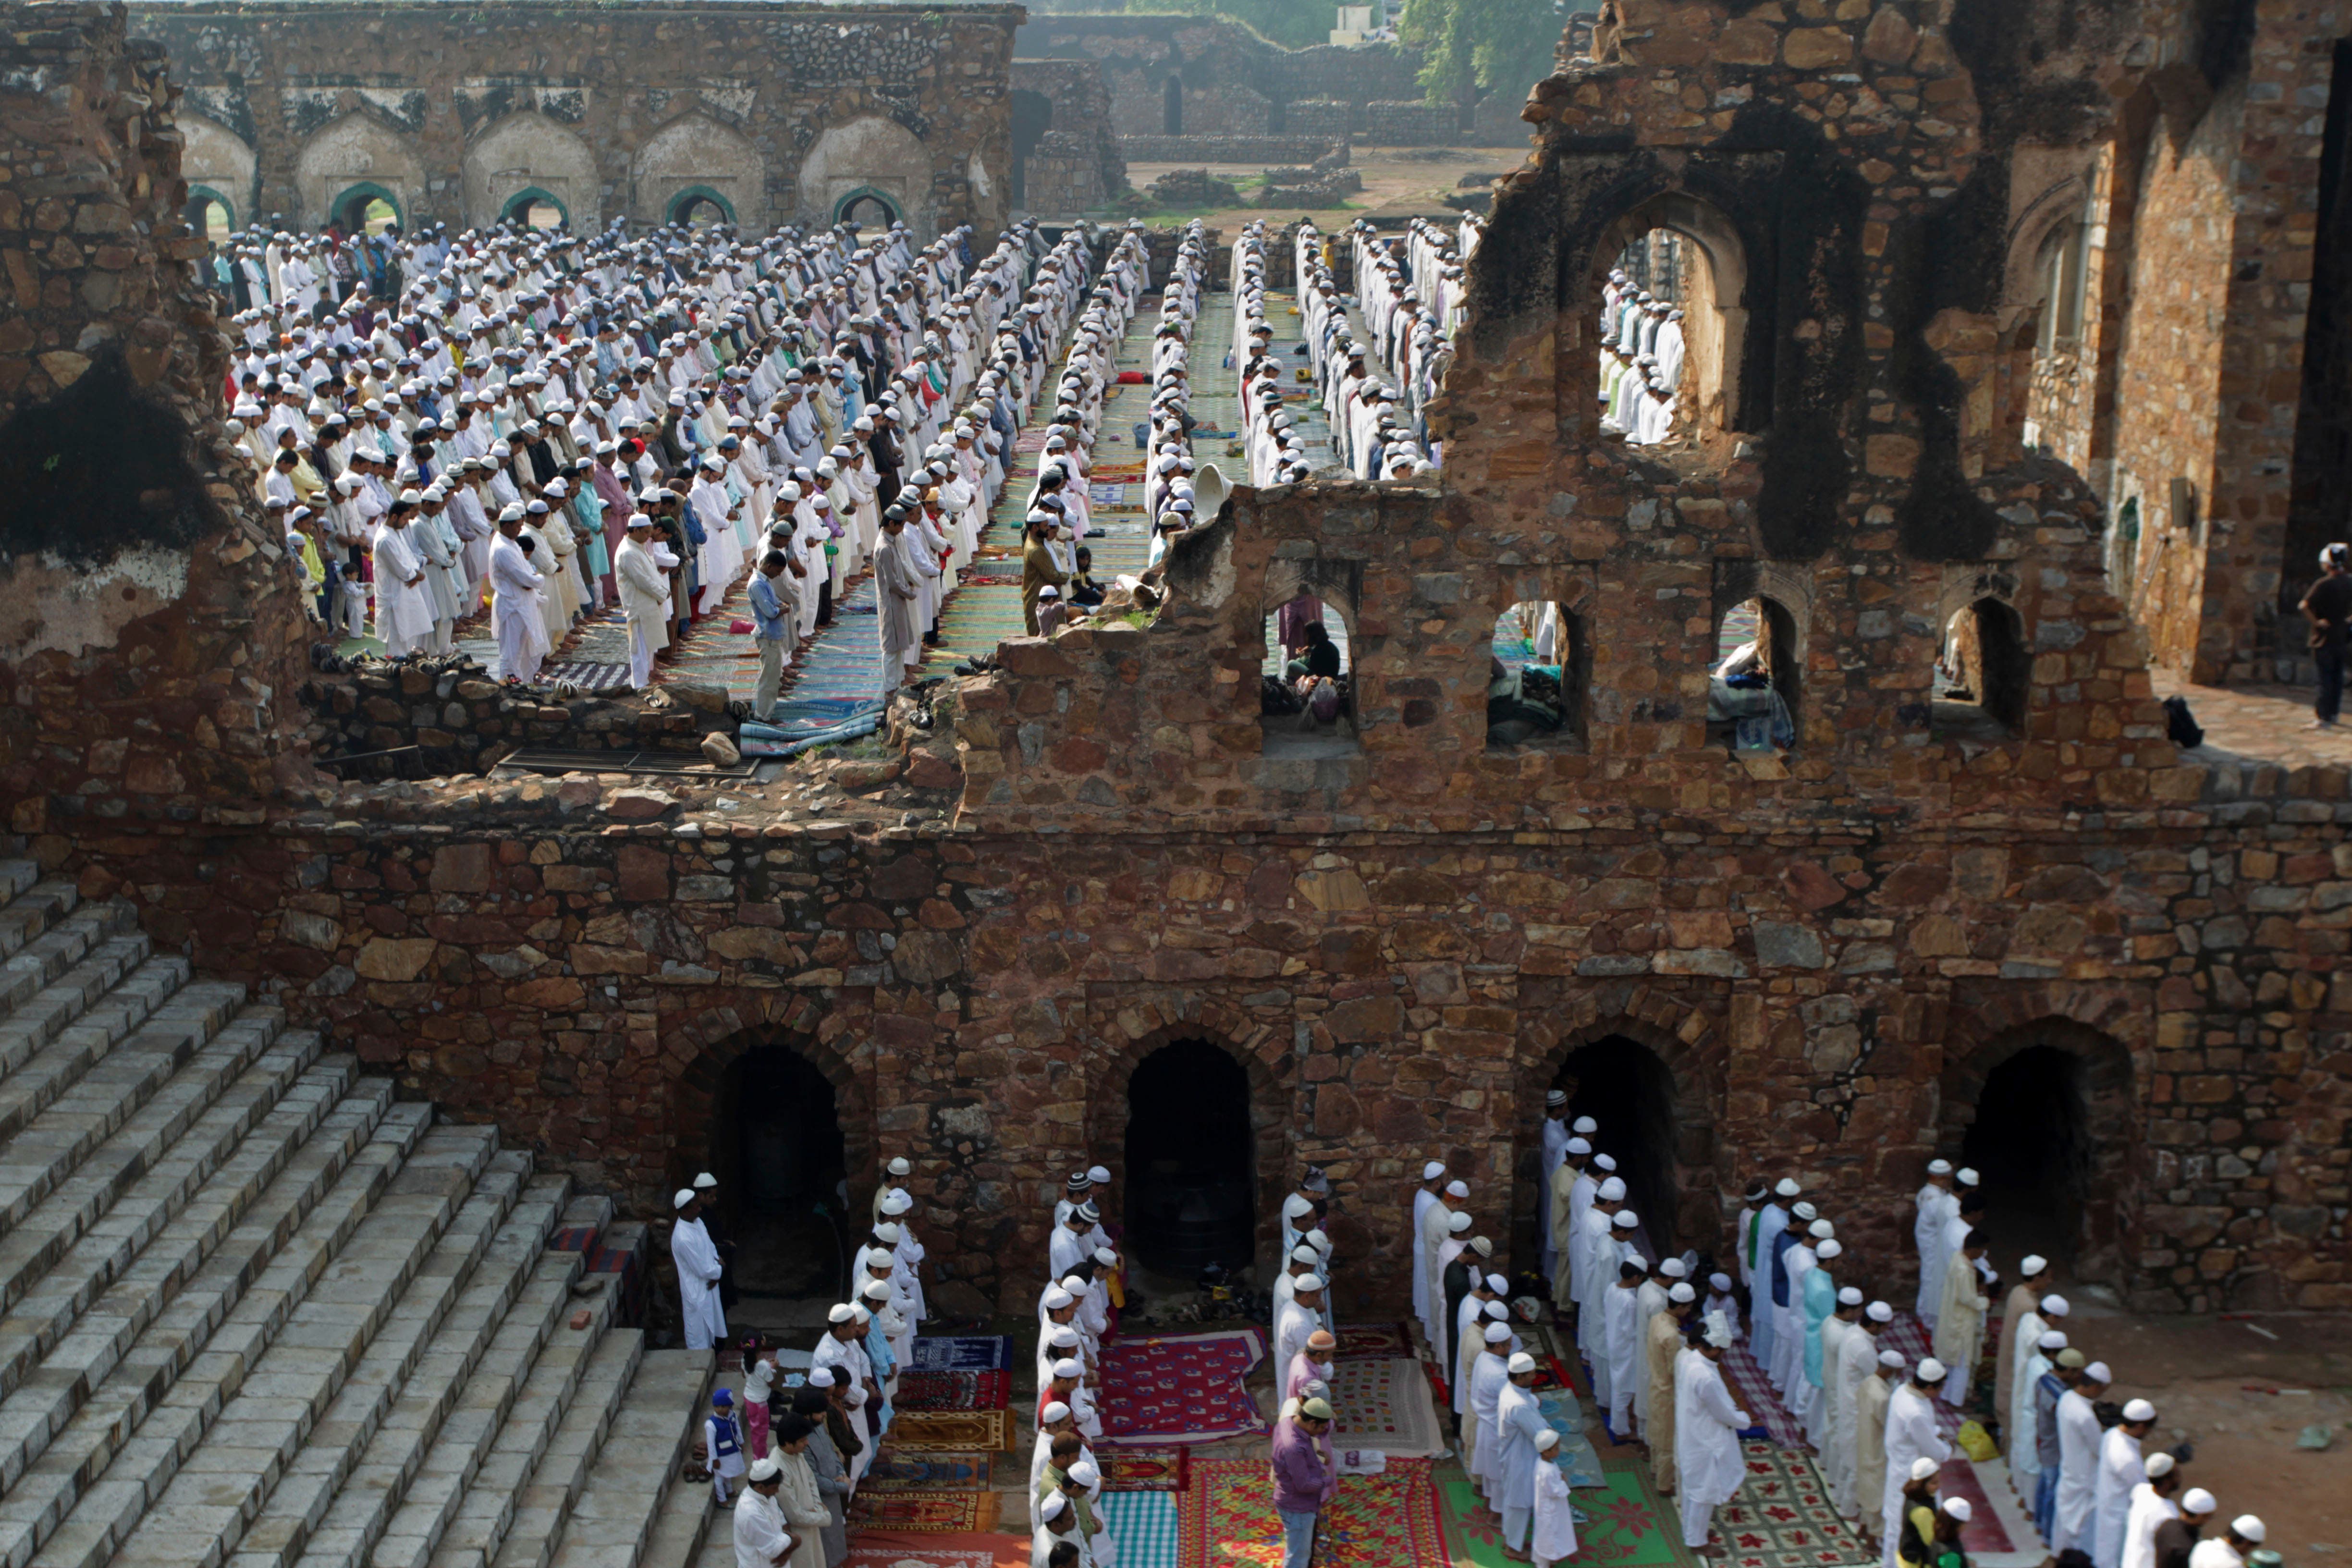  India Muslims offer prayers at the Ferozshah Kotla Mosque during Eid al-Adha in New Delhi, India, Wednesday, Oct. 16, 2013. Eid al-Adha is a religious festival celebrated by Muslims worldwide to commemorate the willingness of Prophet Ibrahim to sacrifice his son as an act of obedience to God. (AP Photo/Tsering Topgyal)